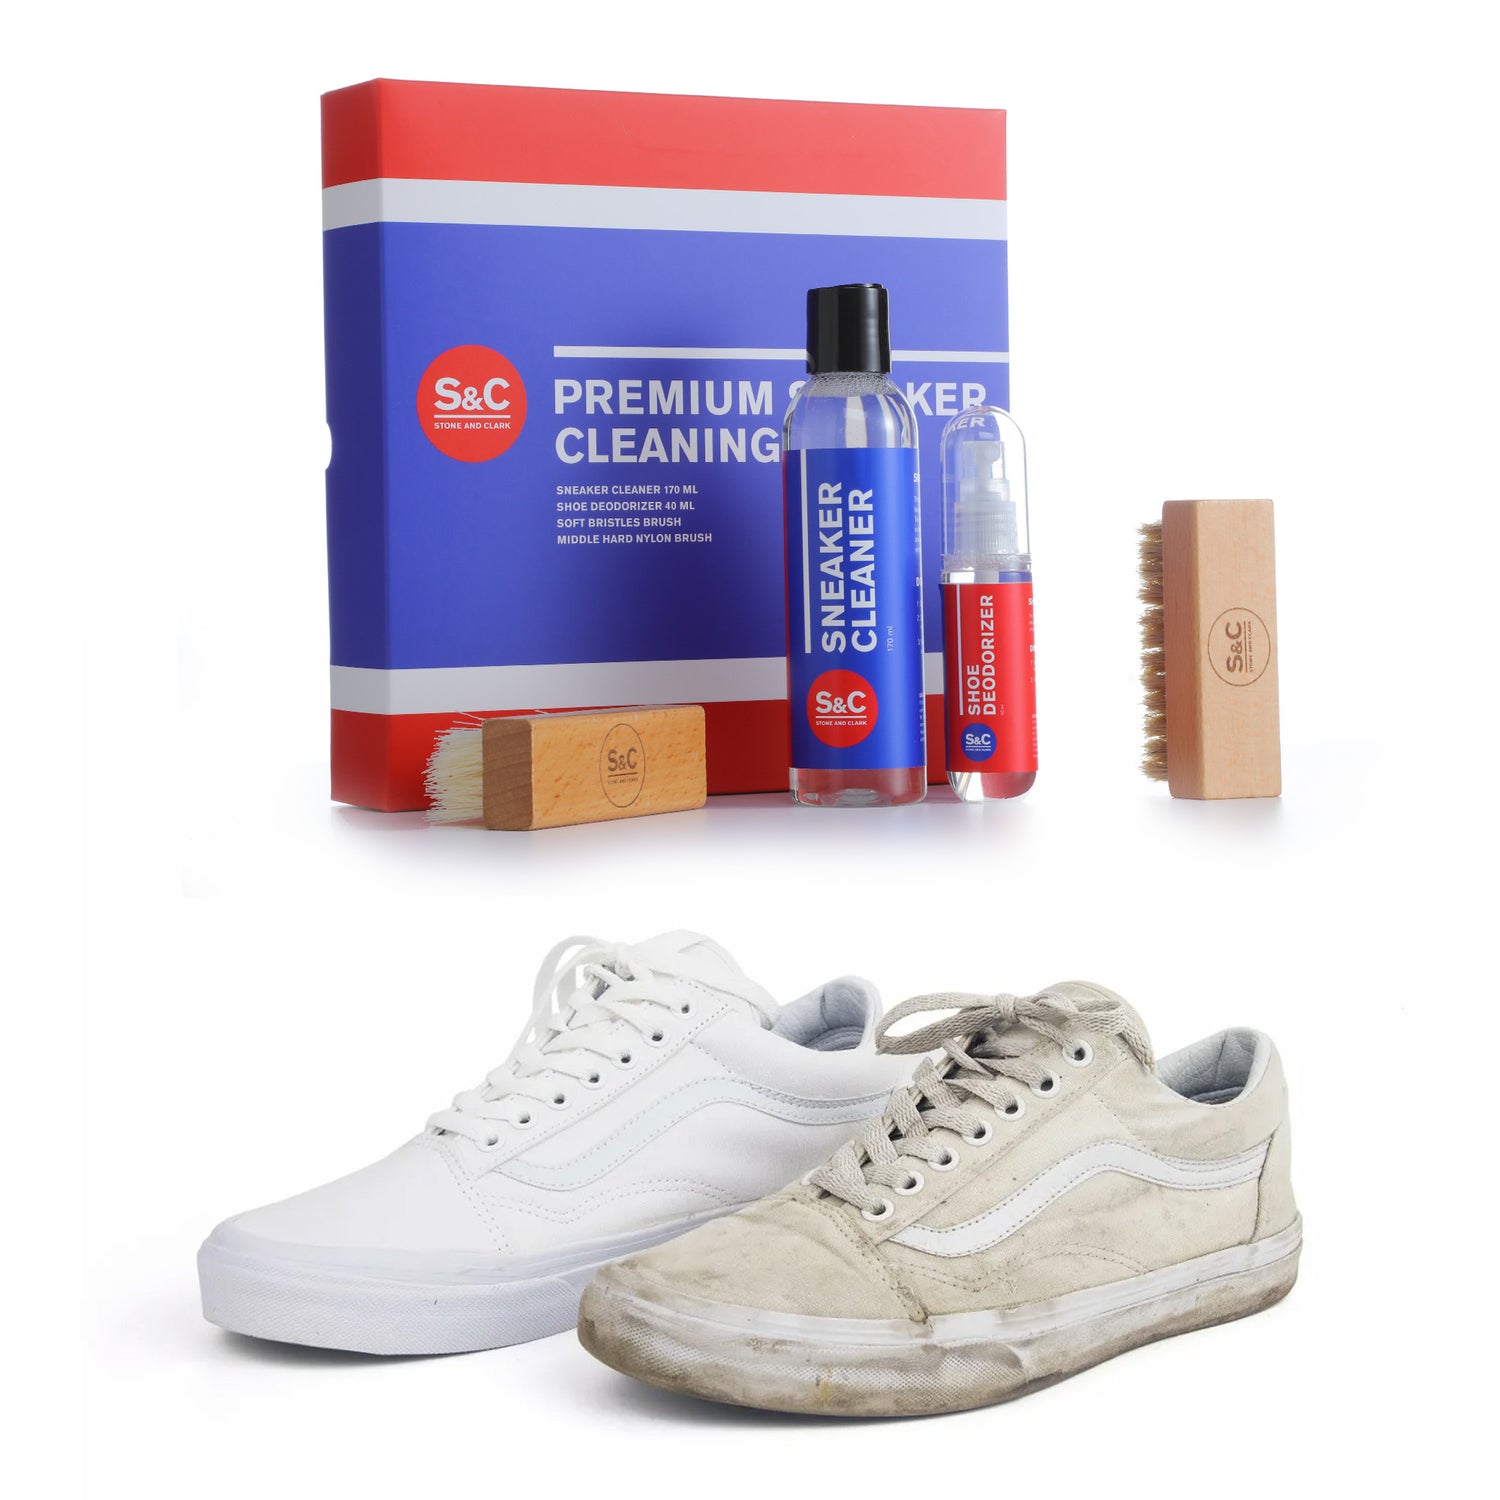 Stone and Clark Sneaker Pro Cleaning & Deodorizing Kit